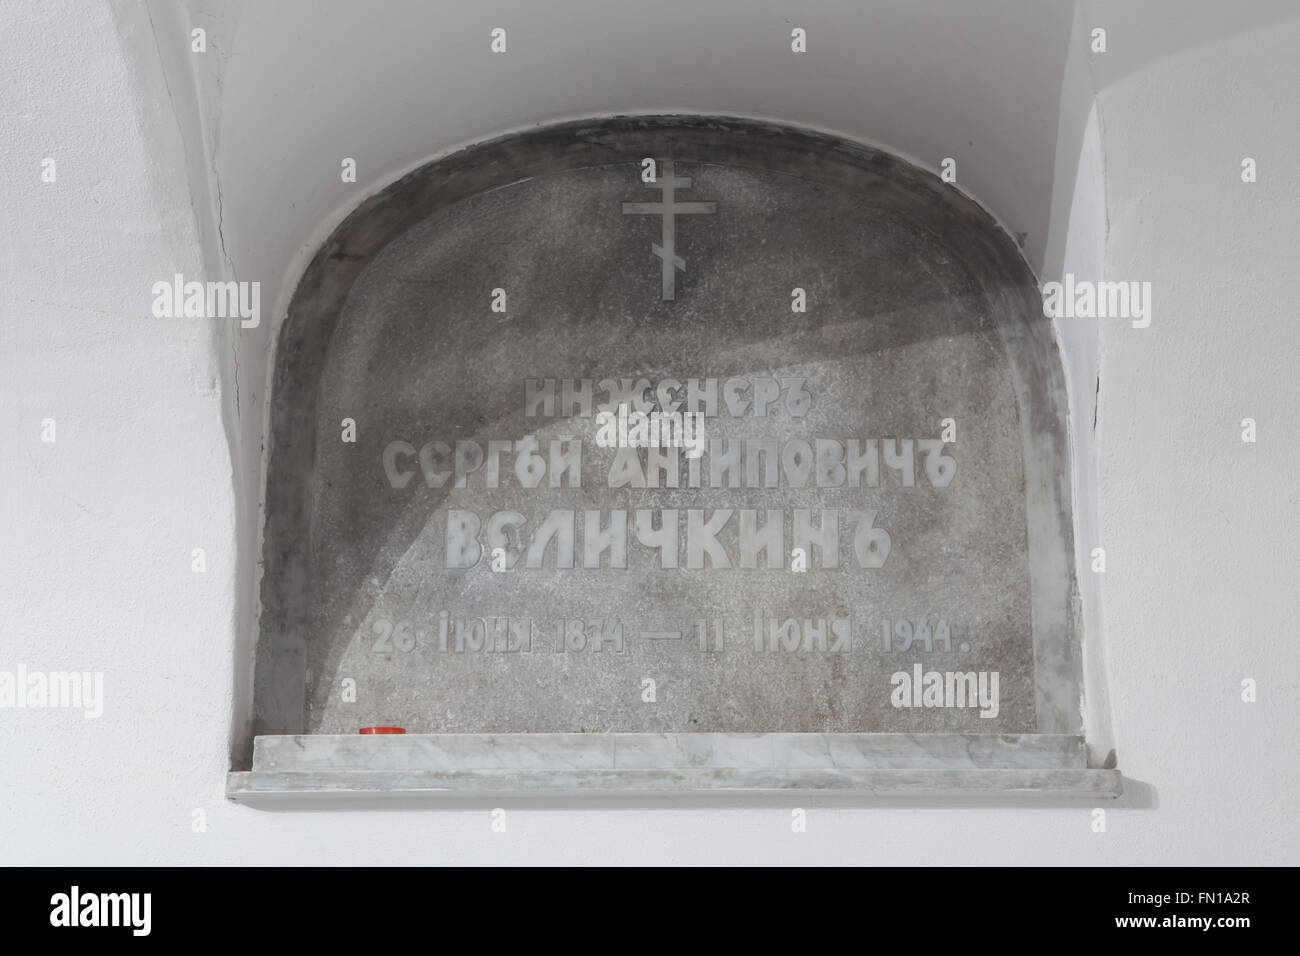 Grave of Russian engineer Sergey Velichkin in the underground crypt of the Dormition Church at the Olsany Cemetery in Prague, Czech Republic. Engineer Sergey Antipovich Velichkin, born June 26, 1874, lived in exile in Czechoslovakia after the Bolshevik Revolution and supervised the construction of the Dormition Church in 1924-1925. He died at age 70 on June 11, 1944. The Dormition church at the Olsany Cemetery was built in 1924-1925 by the Russian white emigre. The underground crypt was used as a burial place for the most notable persons of the Russian emigration in Czechoslovakia. Stock Photo